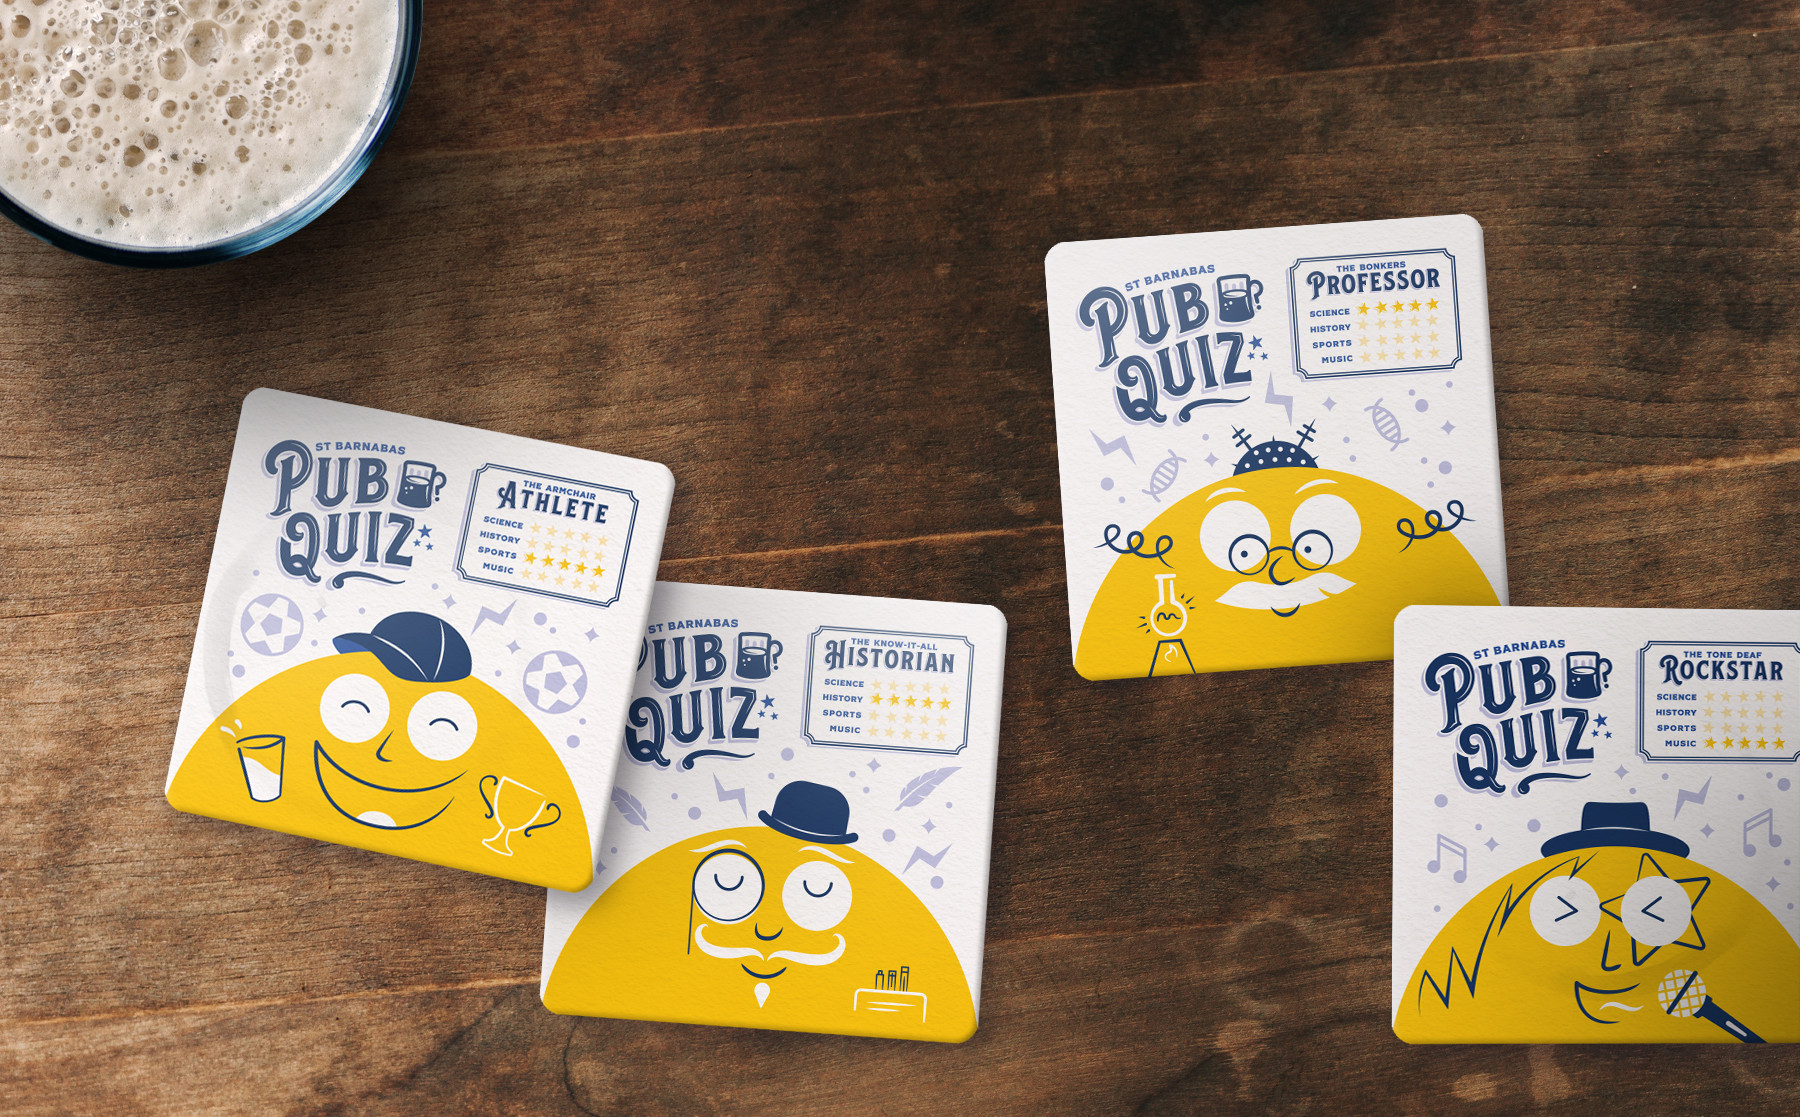 StBarnabas Hospice Pub Quiz Illustrated Beer Mat Design by Root Studio 2